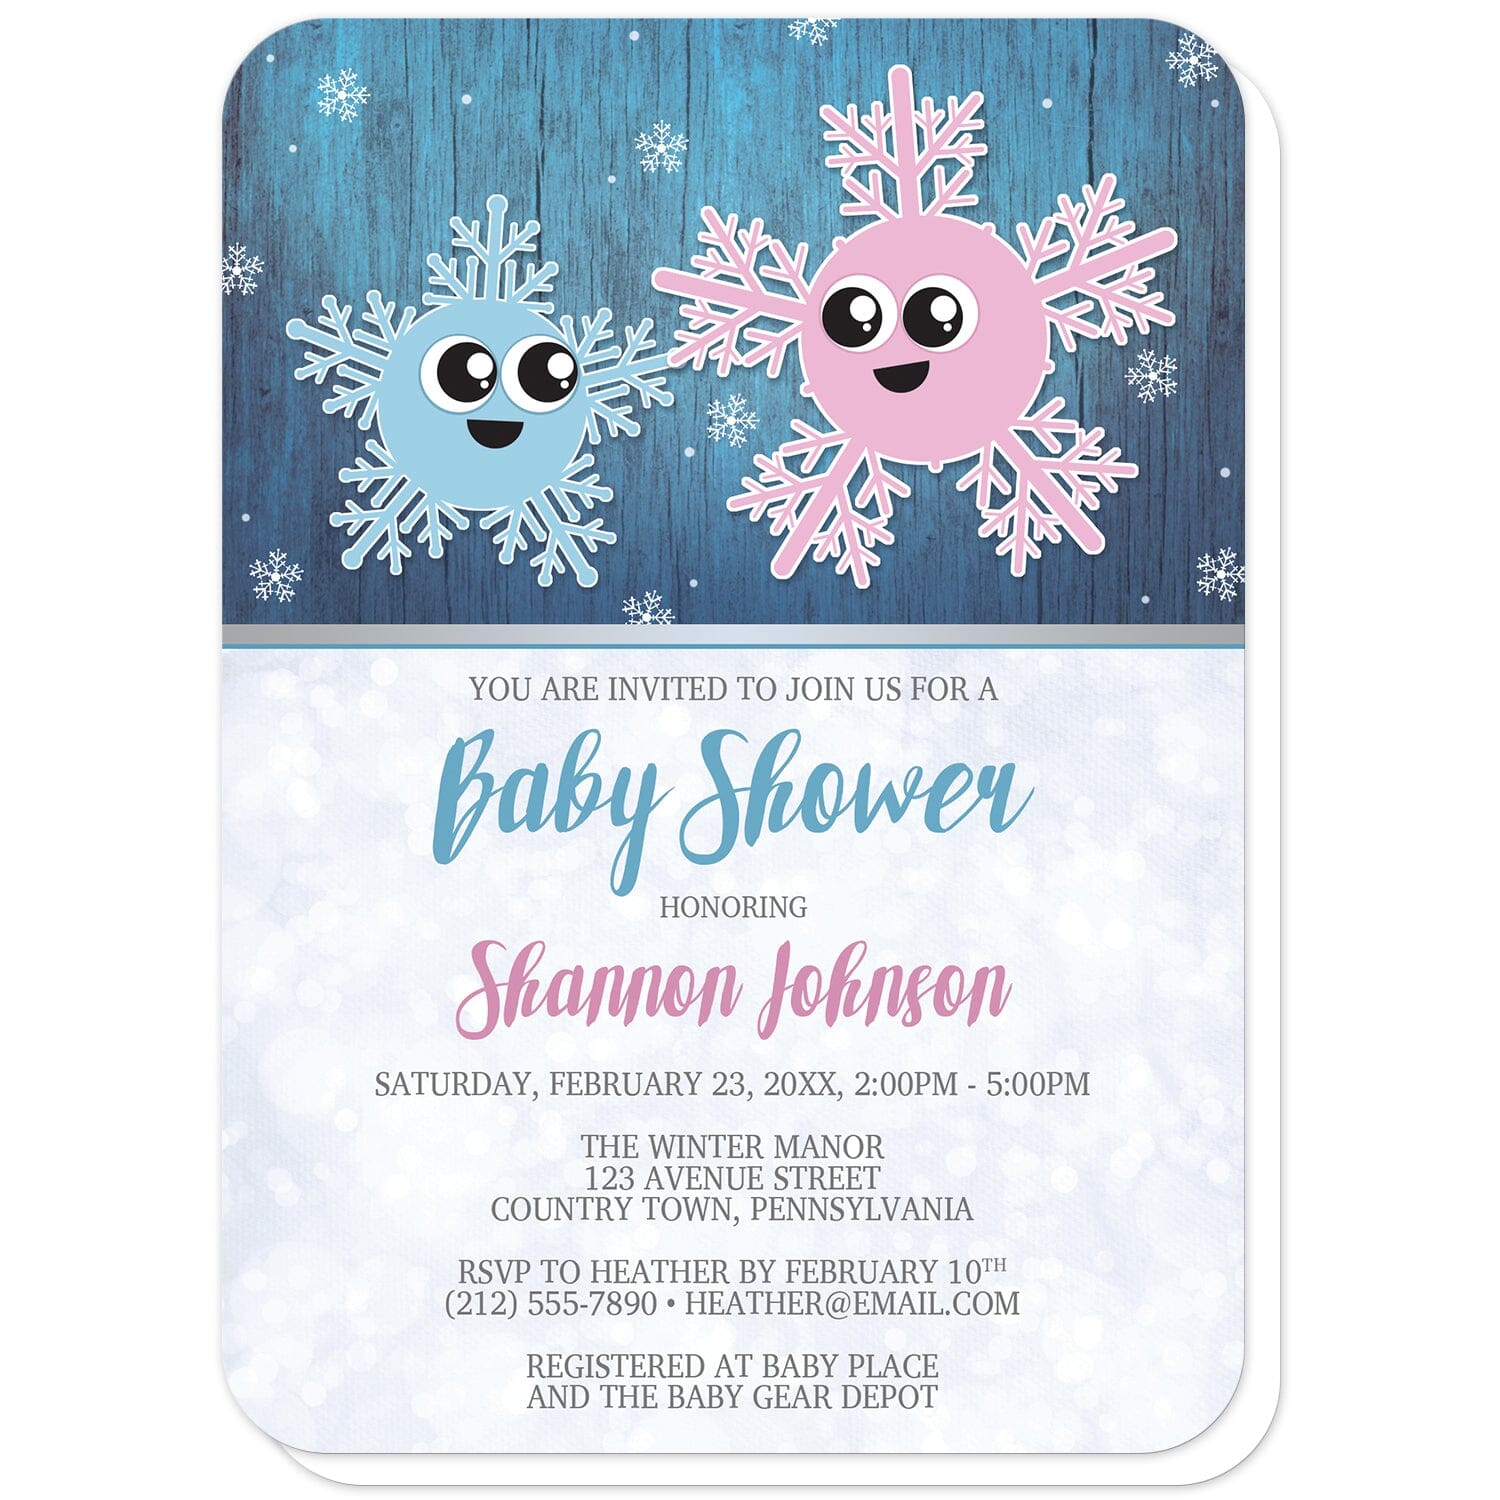 Cute Snowflake Rustic Winter Boy Baby Shower Invitations (with rounded corners) at Artistically Invited. Cute snowflake rustic winter boy baby shower invitations with an adorable illustration of little boy baby snowflake with his pink mommy snowflake. They are displayed over a dark blue background with a wood grain overlay, and smaller white snowflakes floating down. 